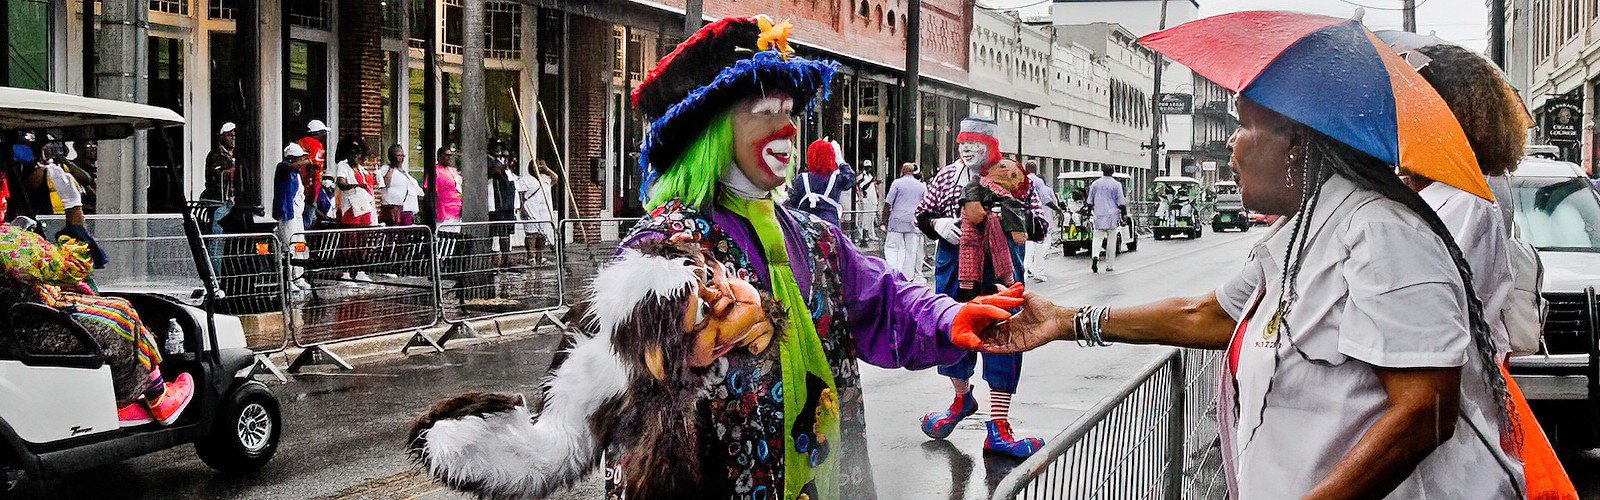 A smiling clown interacts with a parade watcher. The AEAONMS Inc. is recognized as a benevolent, charitable and fraternal organization supporting many development programs in the civic, economic, medical and educational fields.